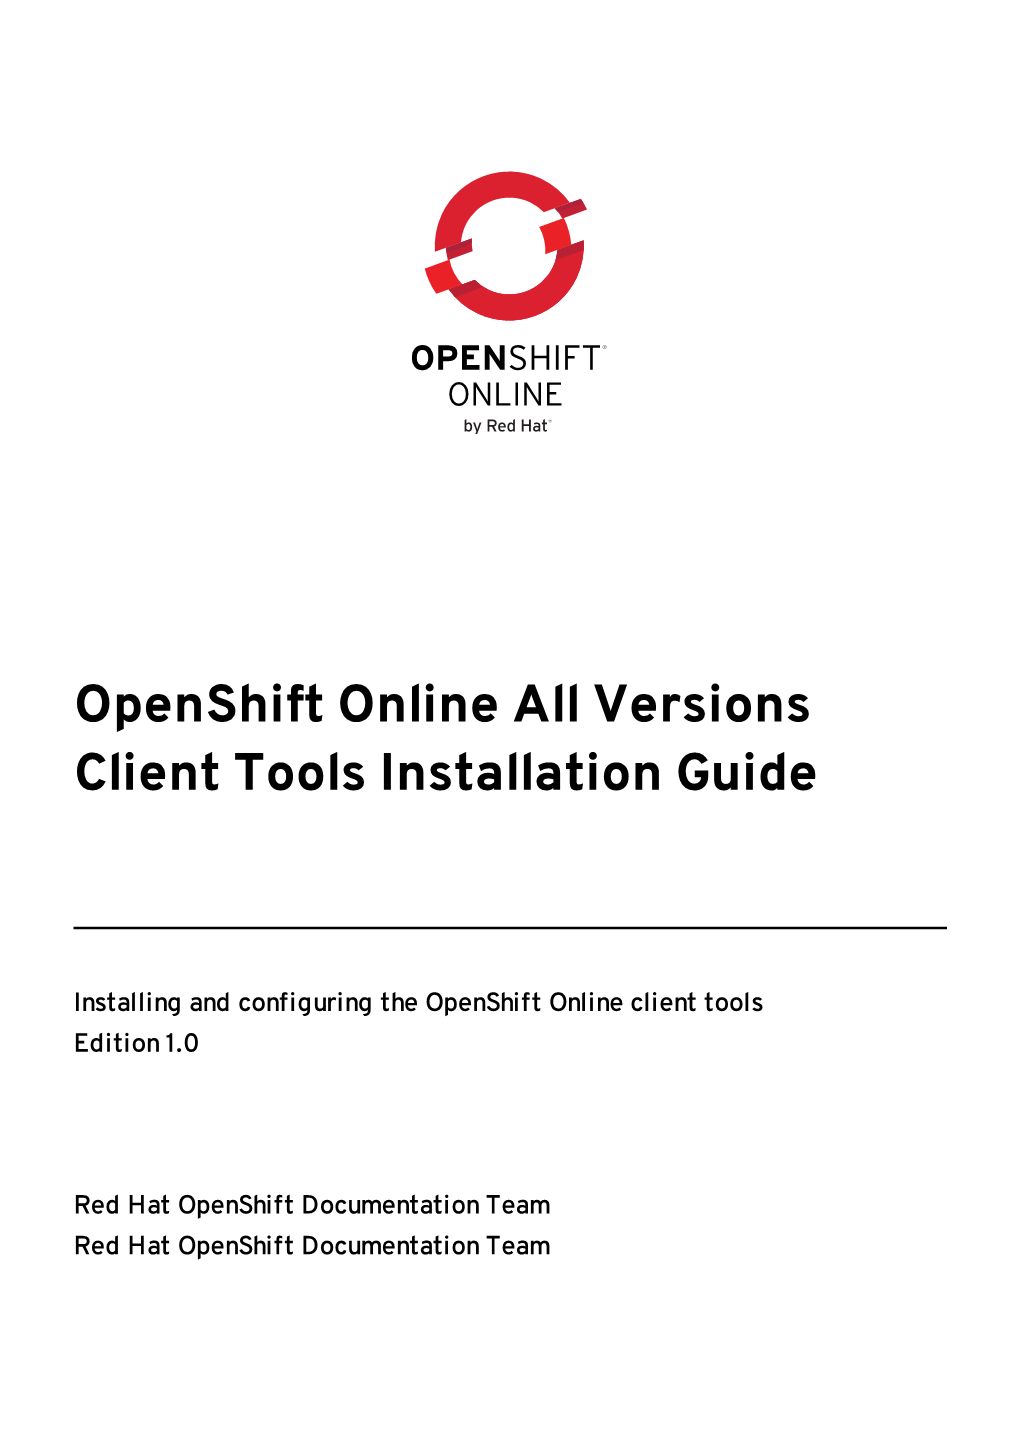 Openshift Online All Versions Client Tools Installation Guide